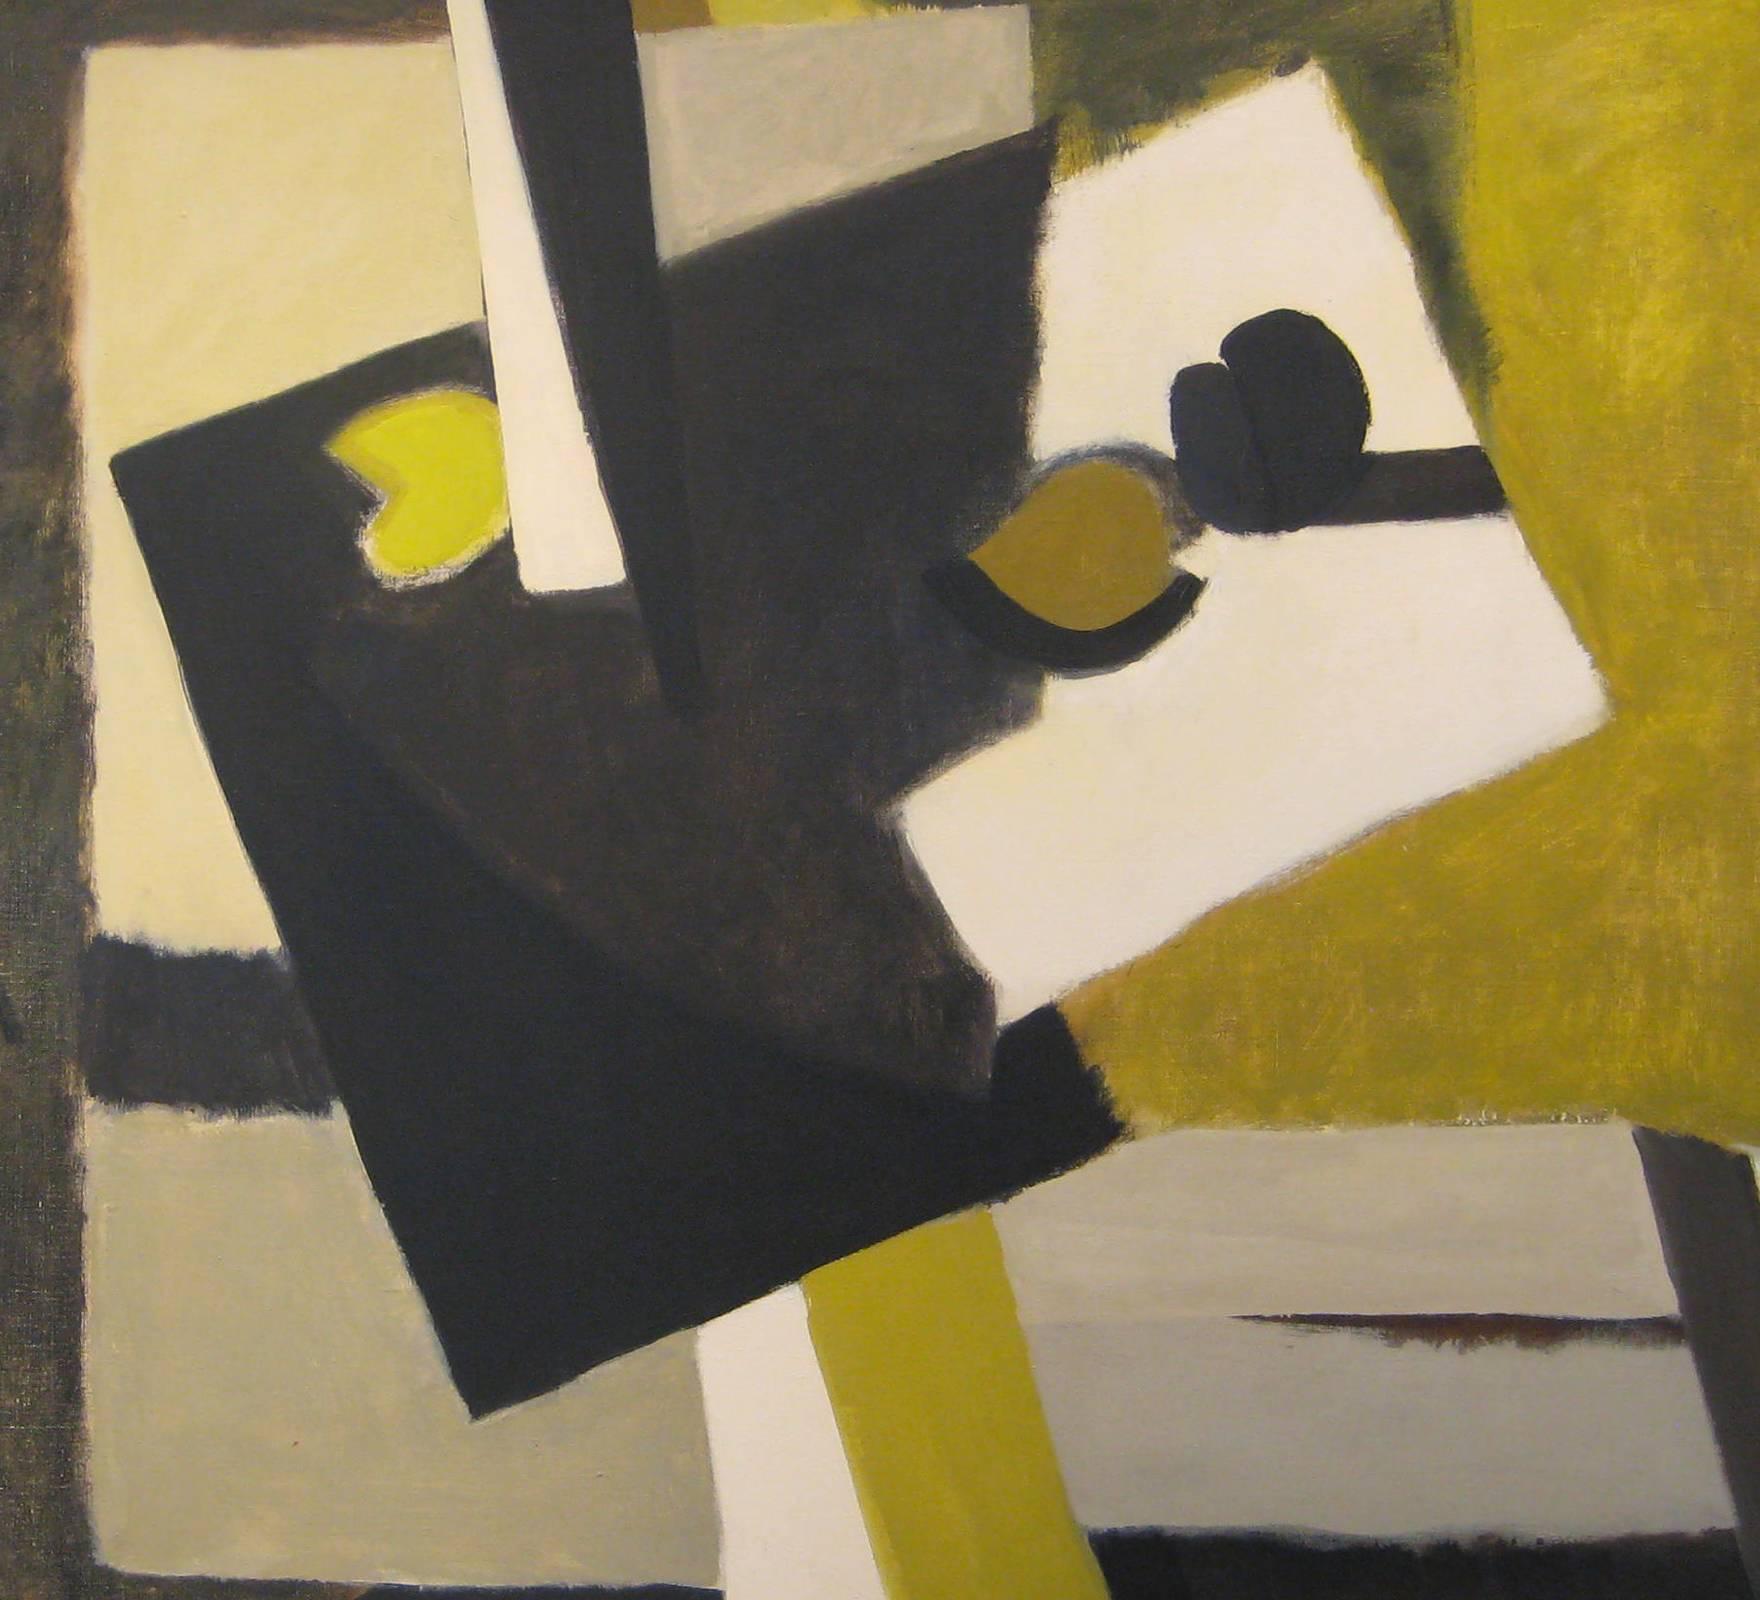 Mid-century modern inspired abstract still life painting on canvas by New York City artist, Lionel Gilbert, c. 1965
oil on canvas with custom black floater frame (Larson Juhl)
41 x 50 x 2 inches framed

This horizontal painting was painted by Lionel